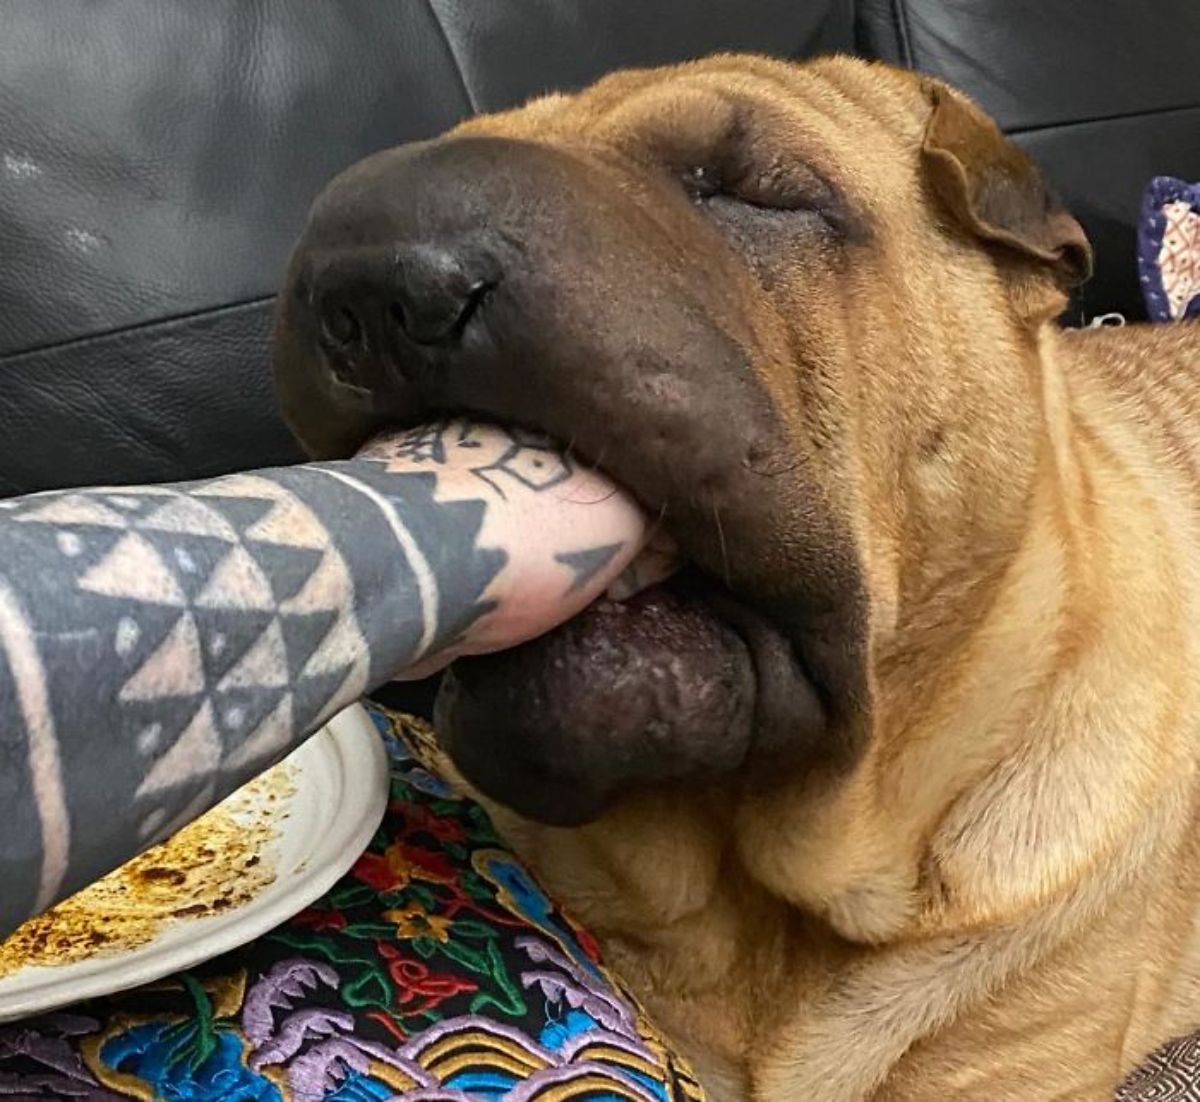 brown shar pei laying on a black sofa with someone's hand inside its mouth